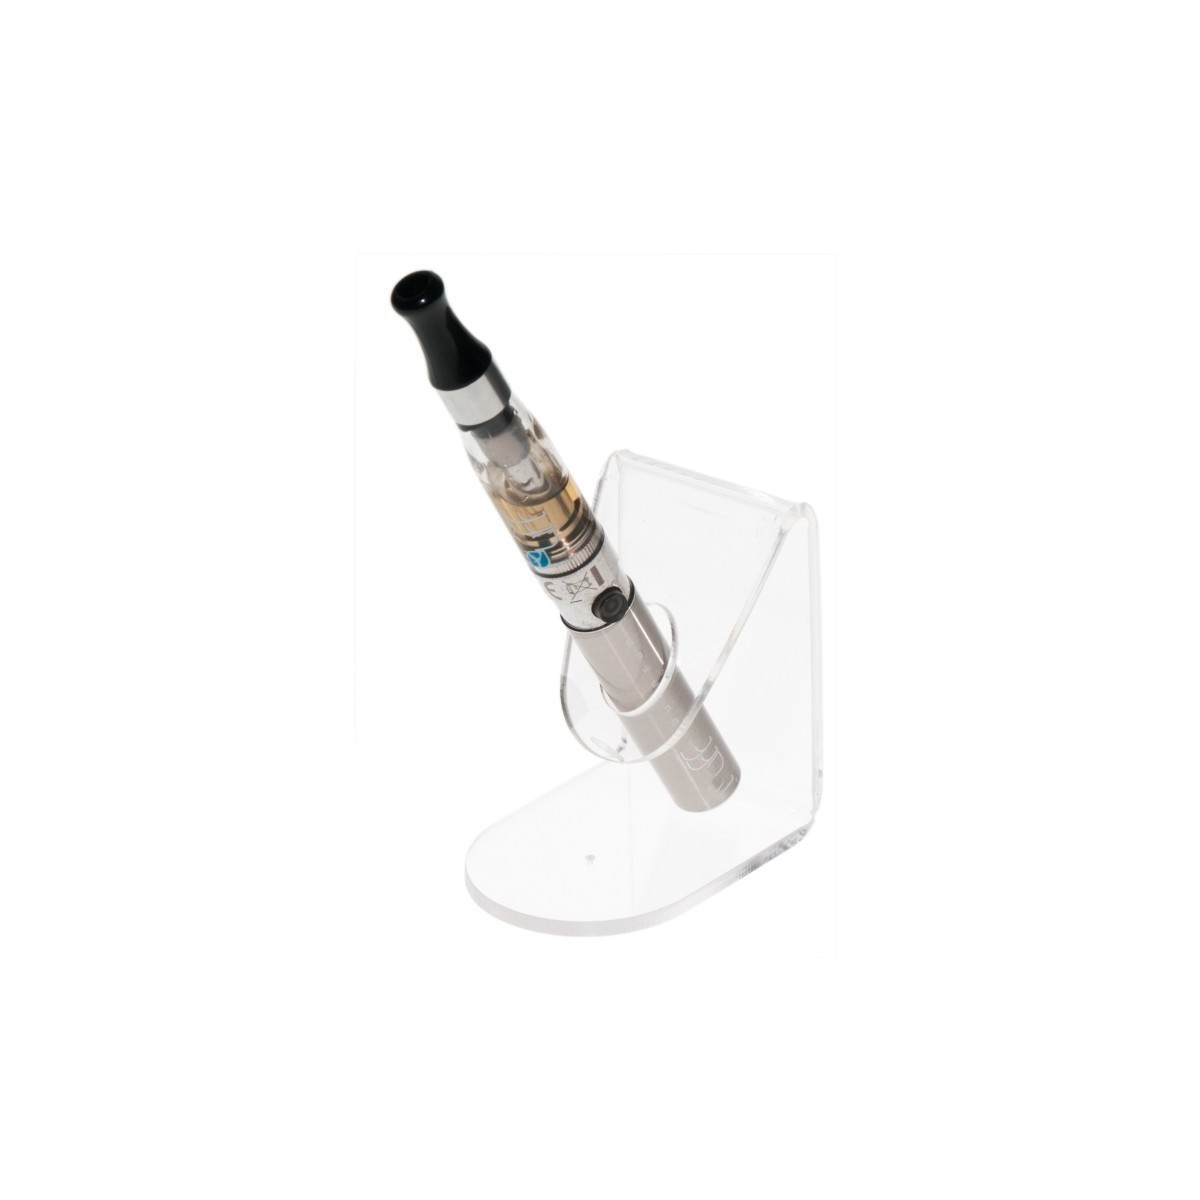 Clear Acrylic countertop E-Cig display stand